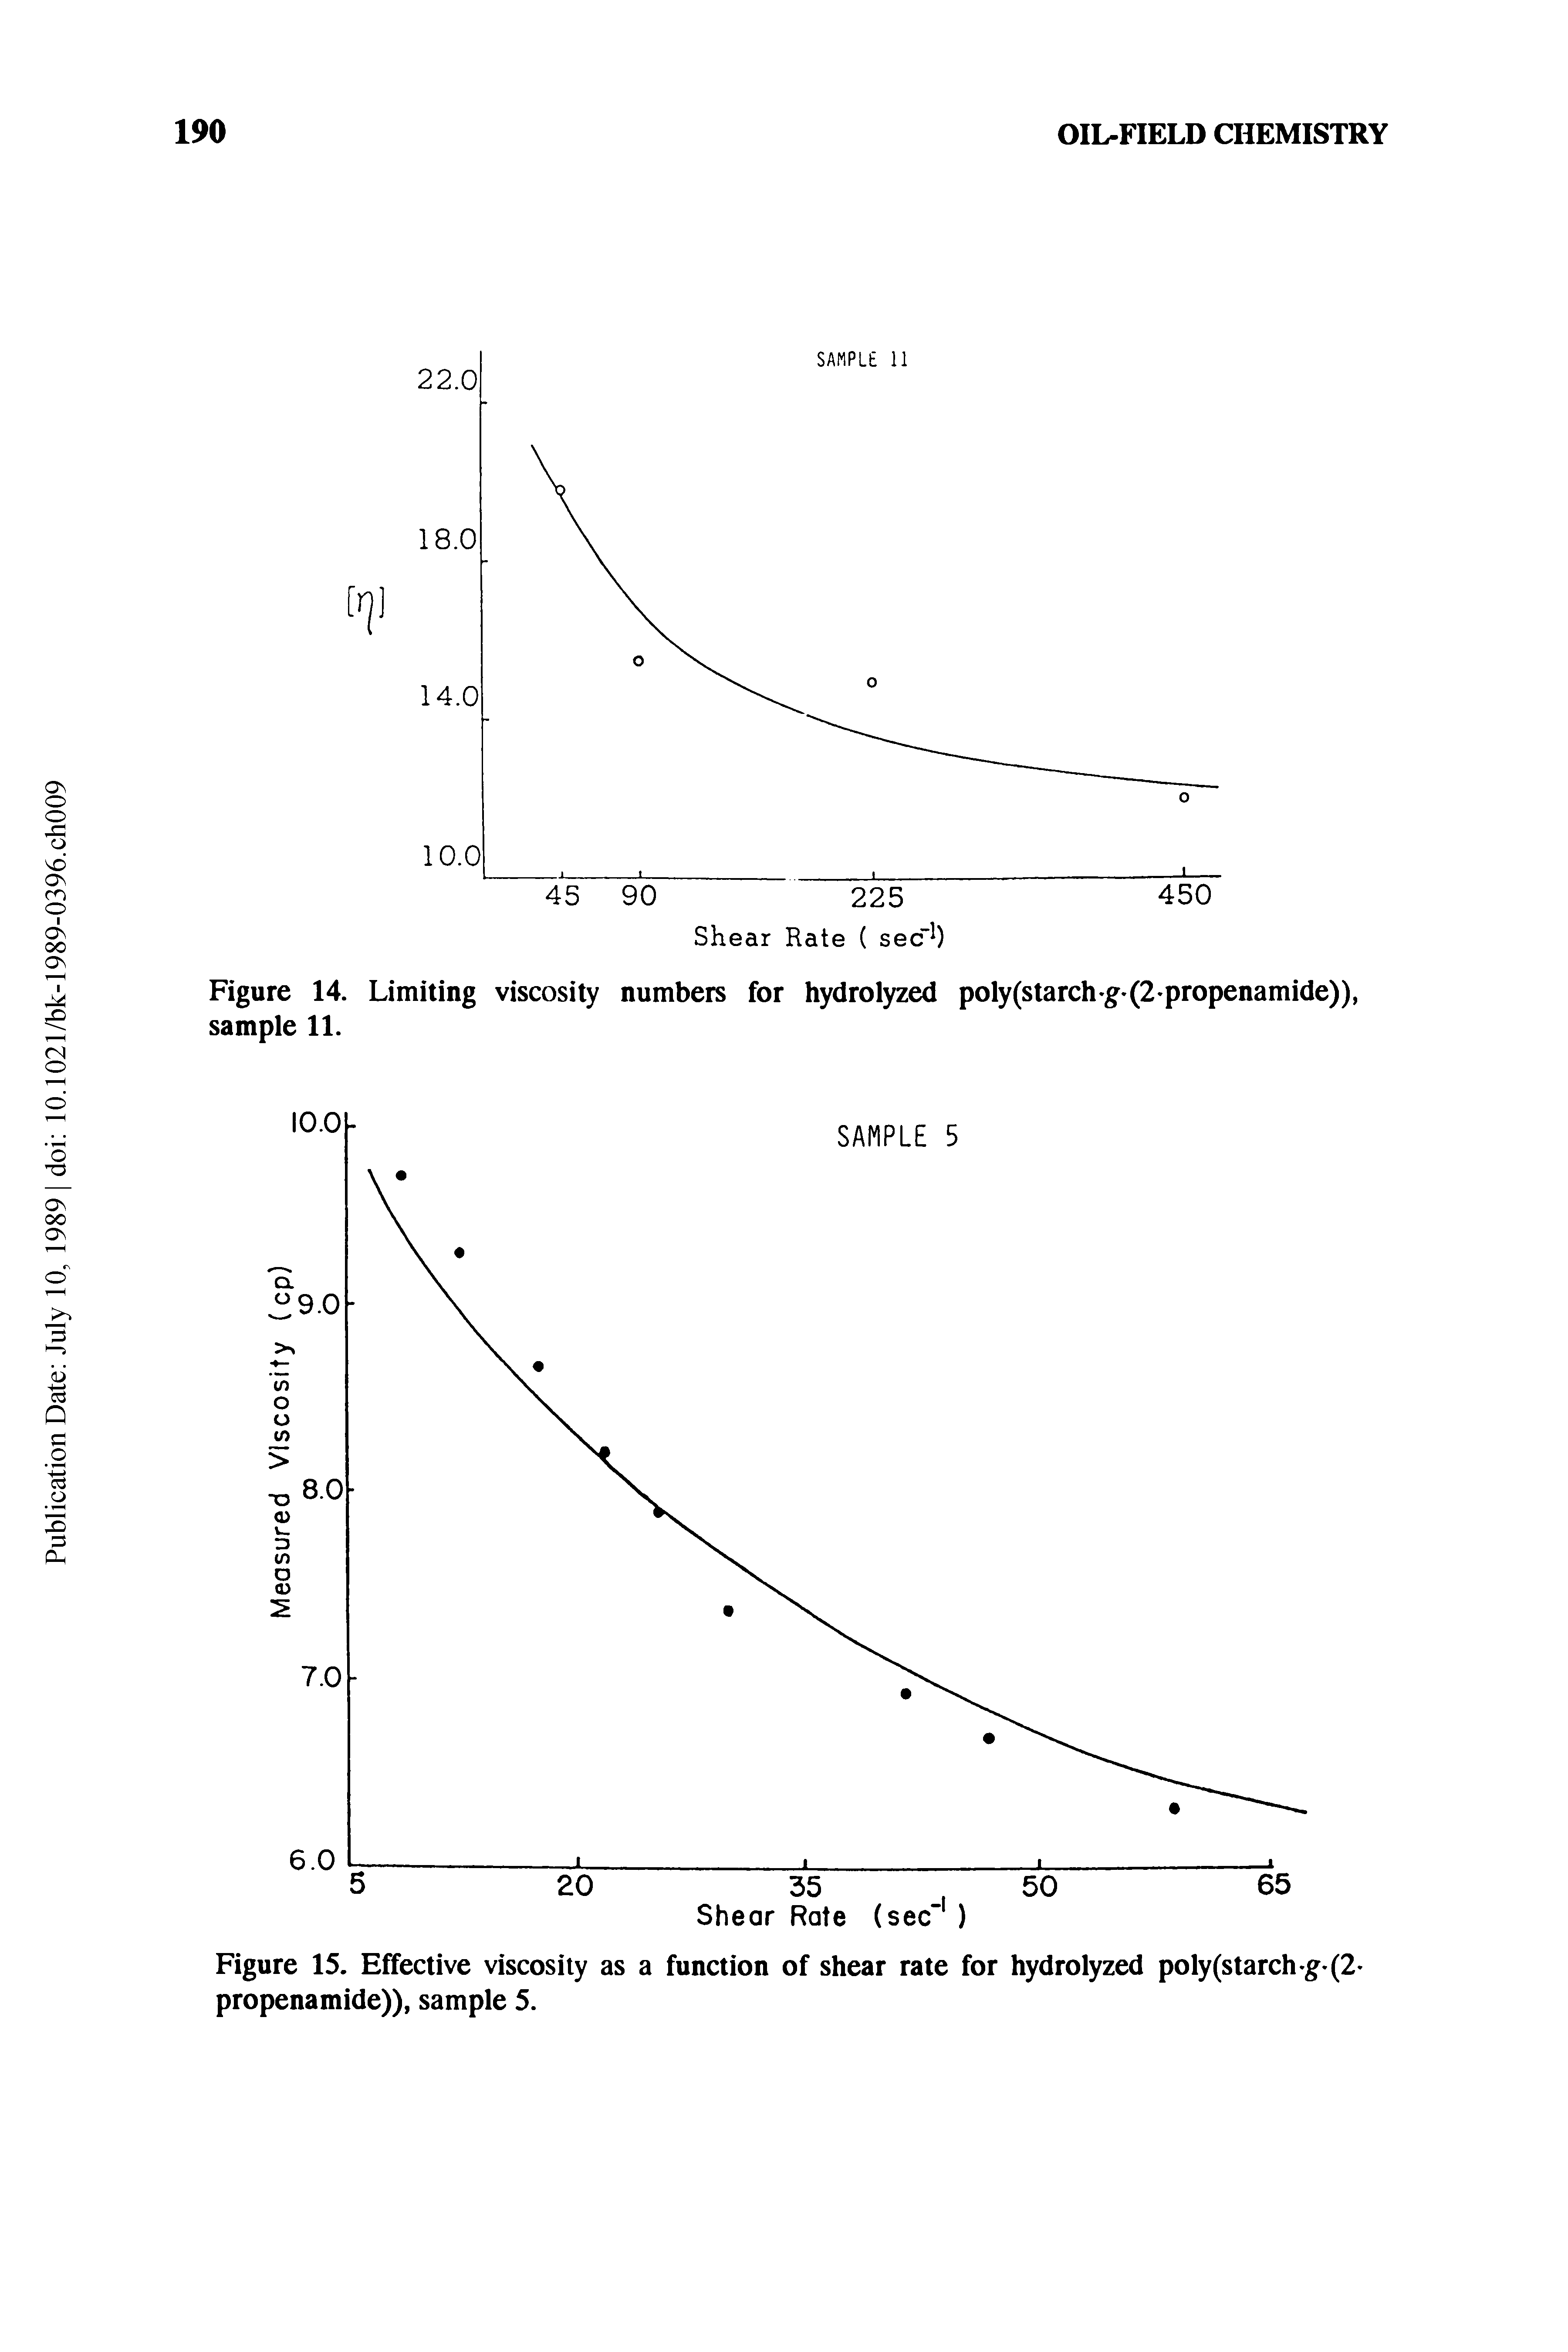 Figure 14. Limiting viscosity numbers for hydrolyzed poly(starch g (2 propenamide)), sample 11.